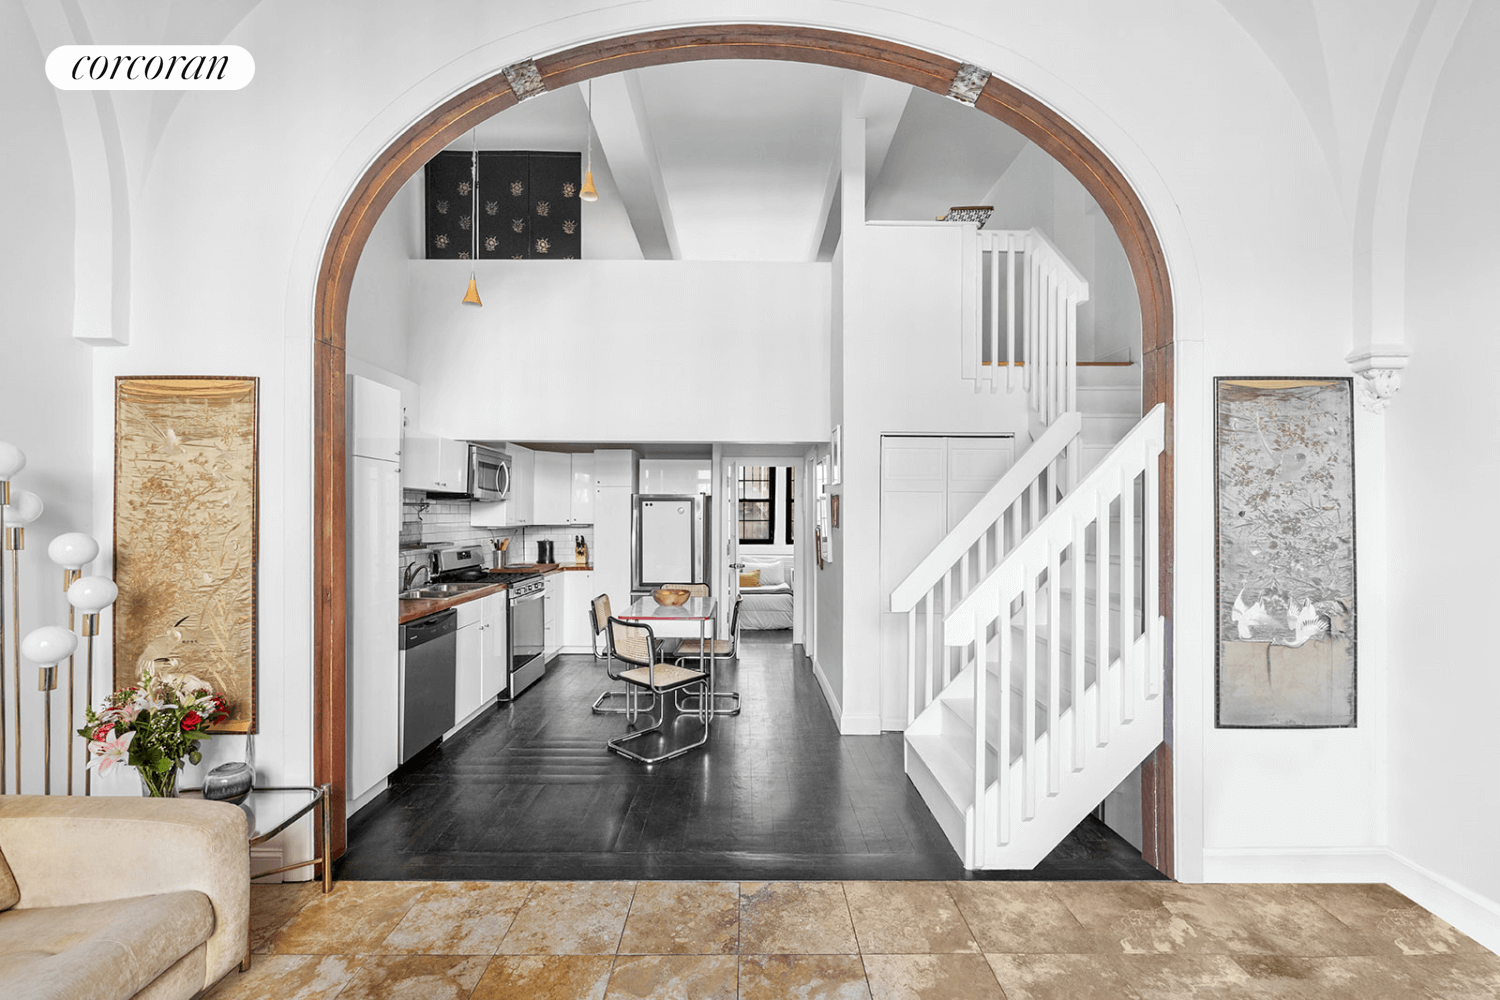 arched opening to the kitchen